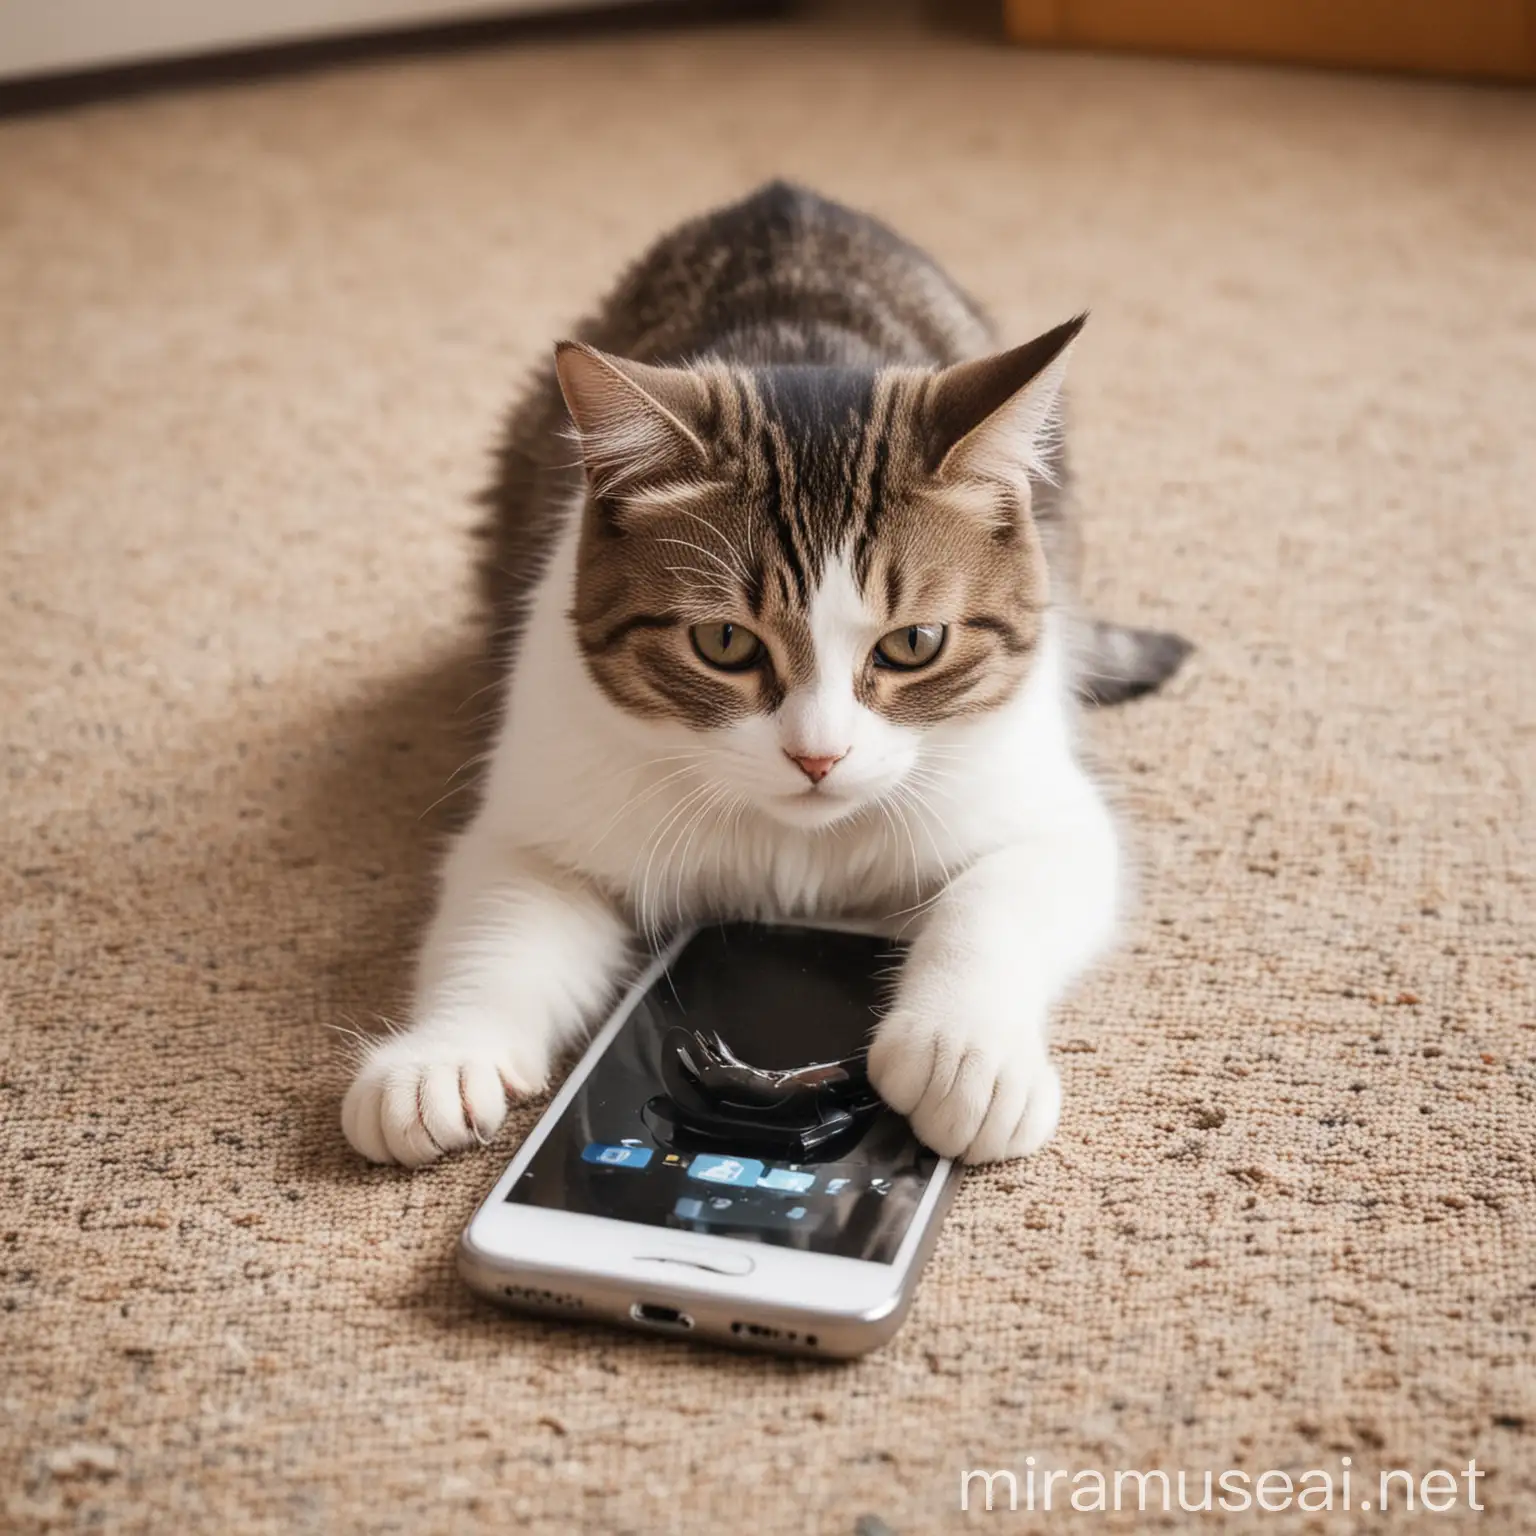 A cat playing in a phone